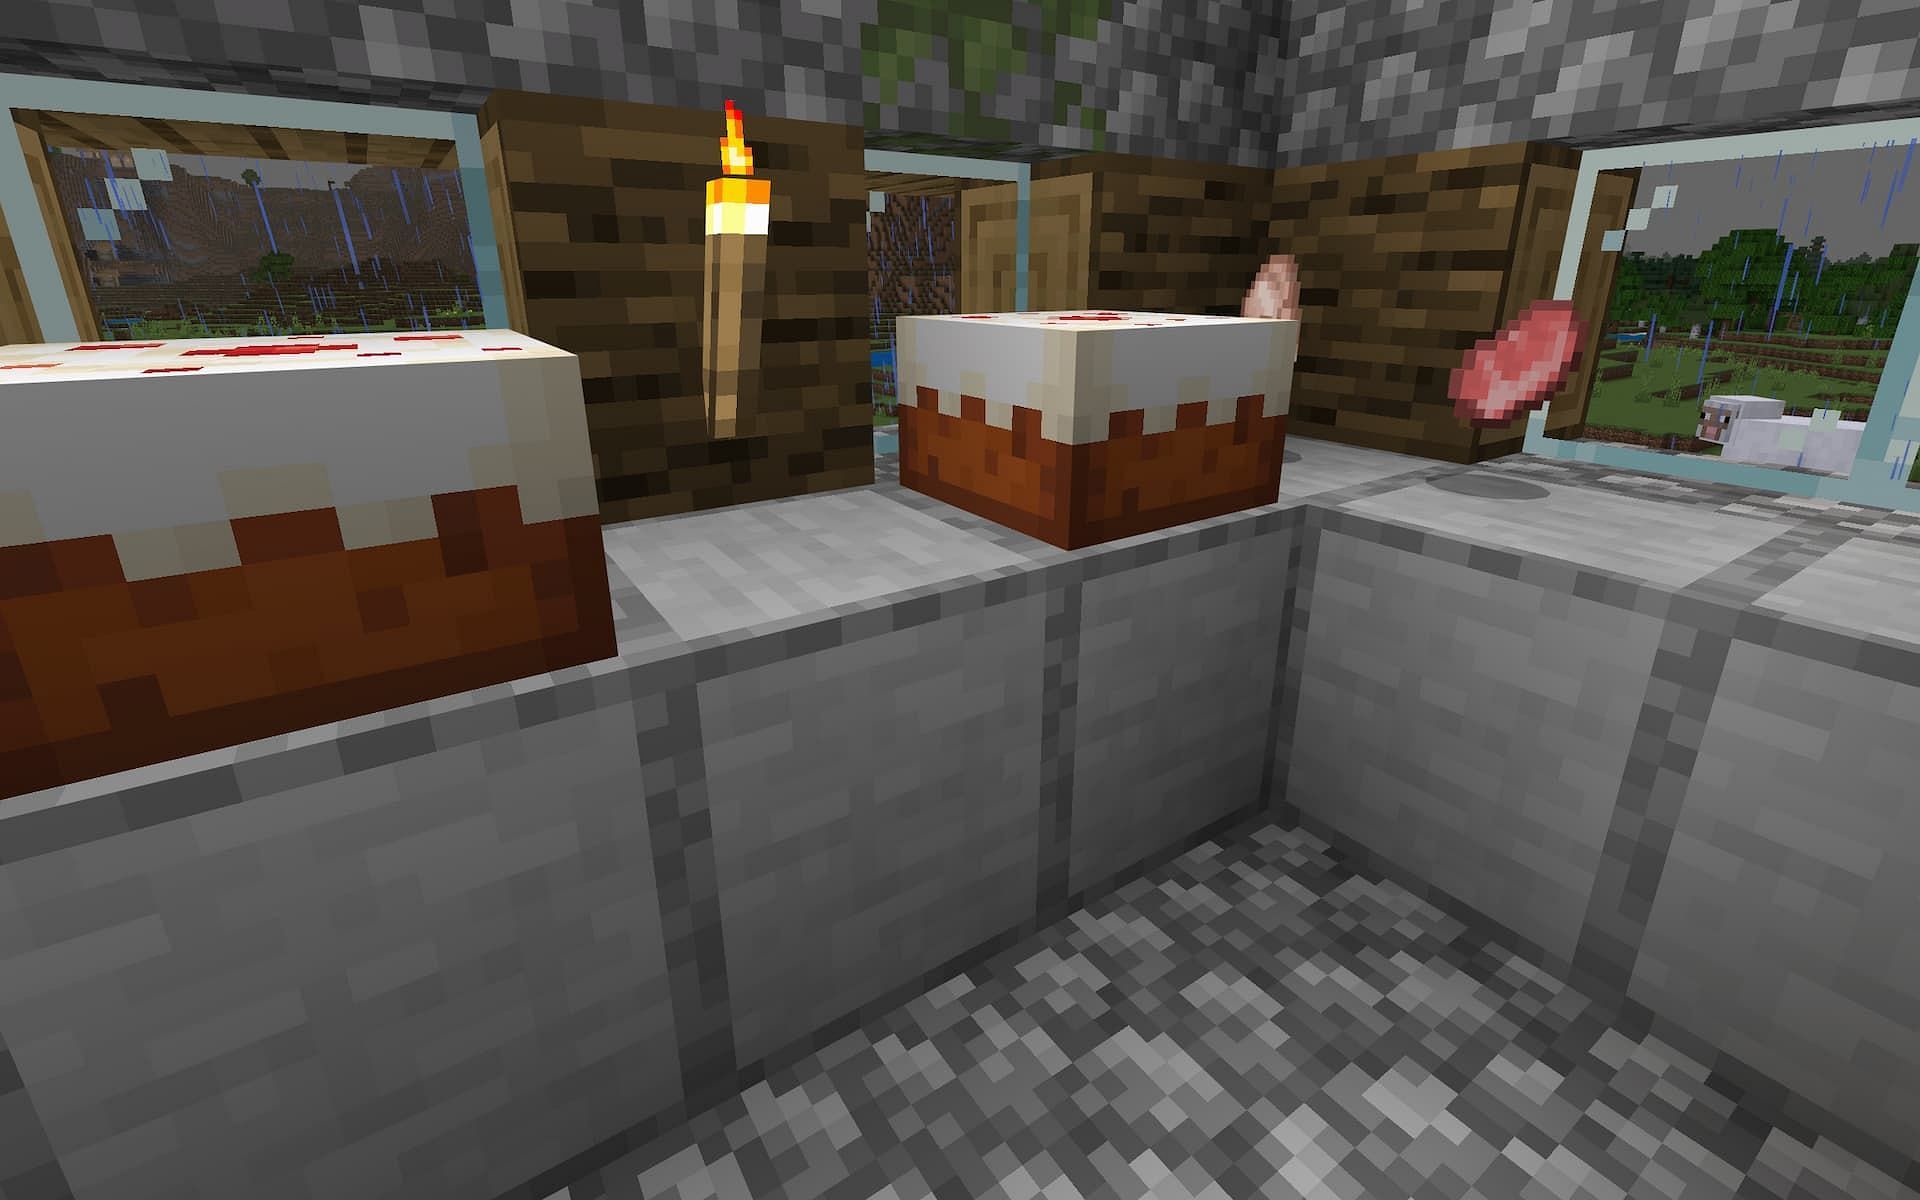 Cakes and meats line a countertop in a Minecraft house.